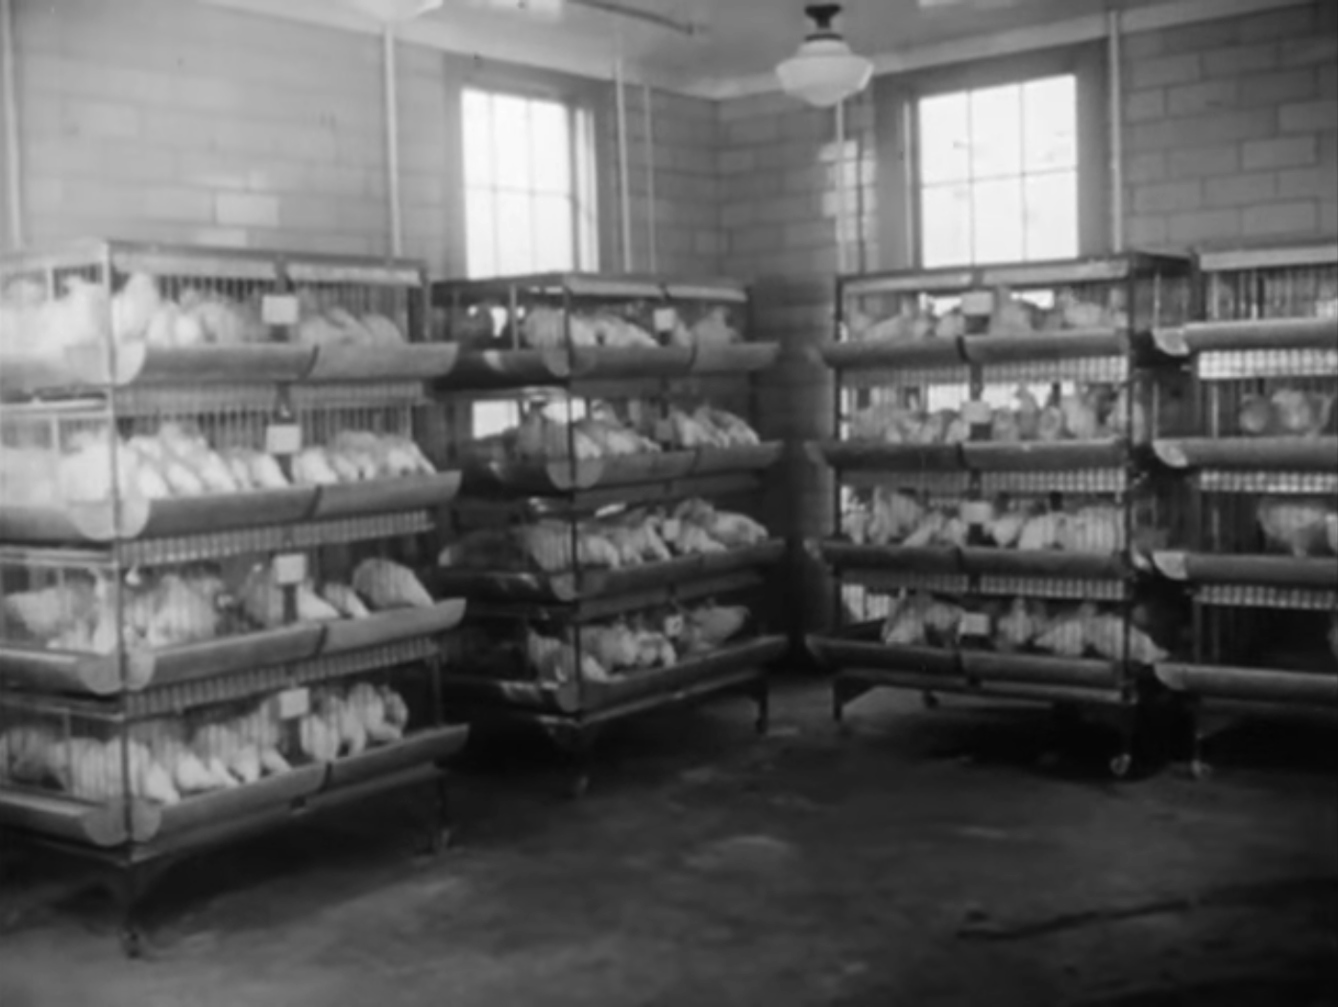 Still from black and white film featuring racks of cages filled with chickens in a battery farm.